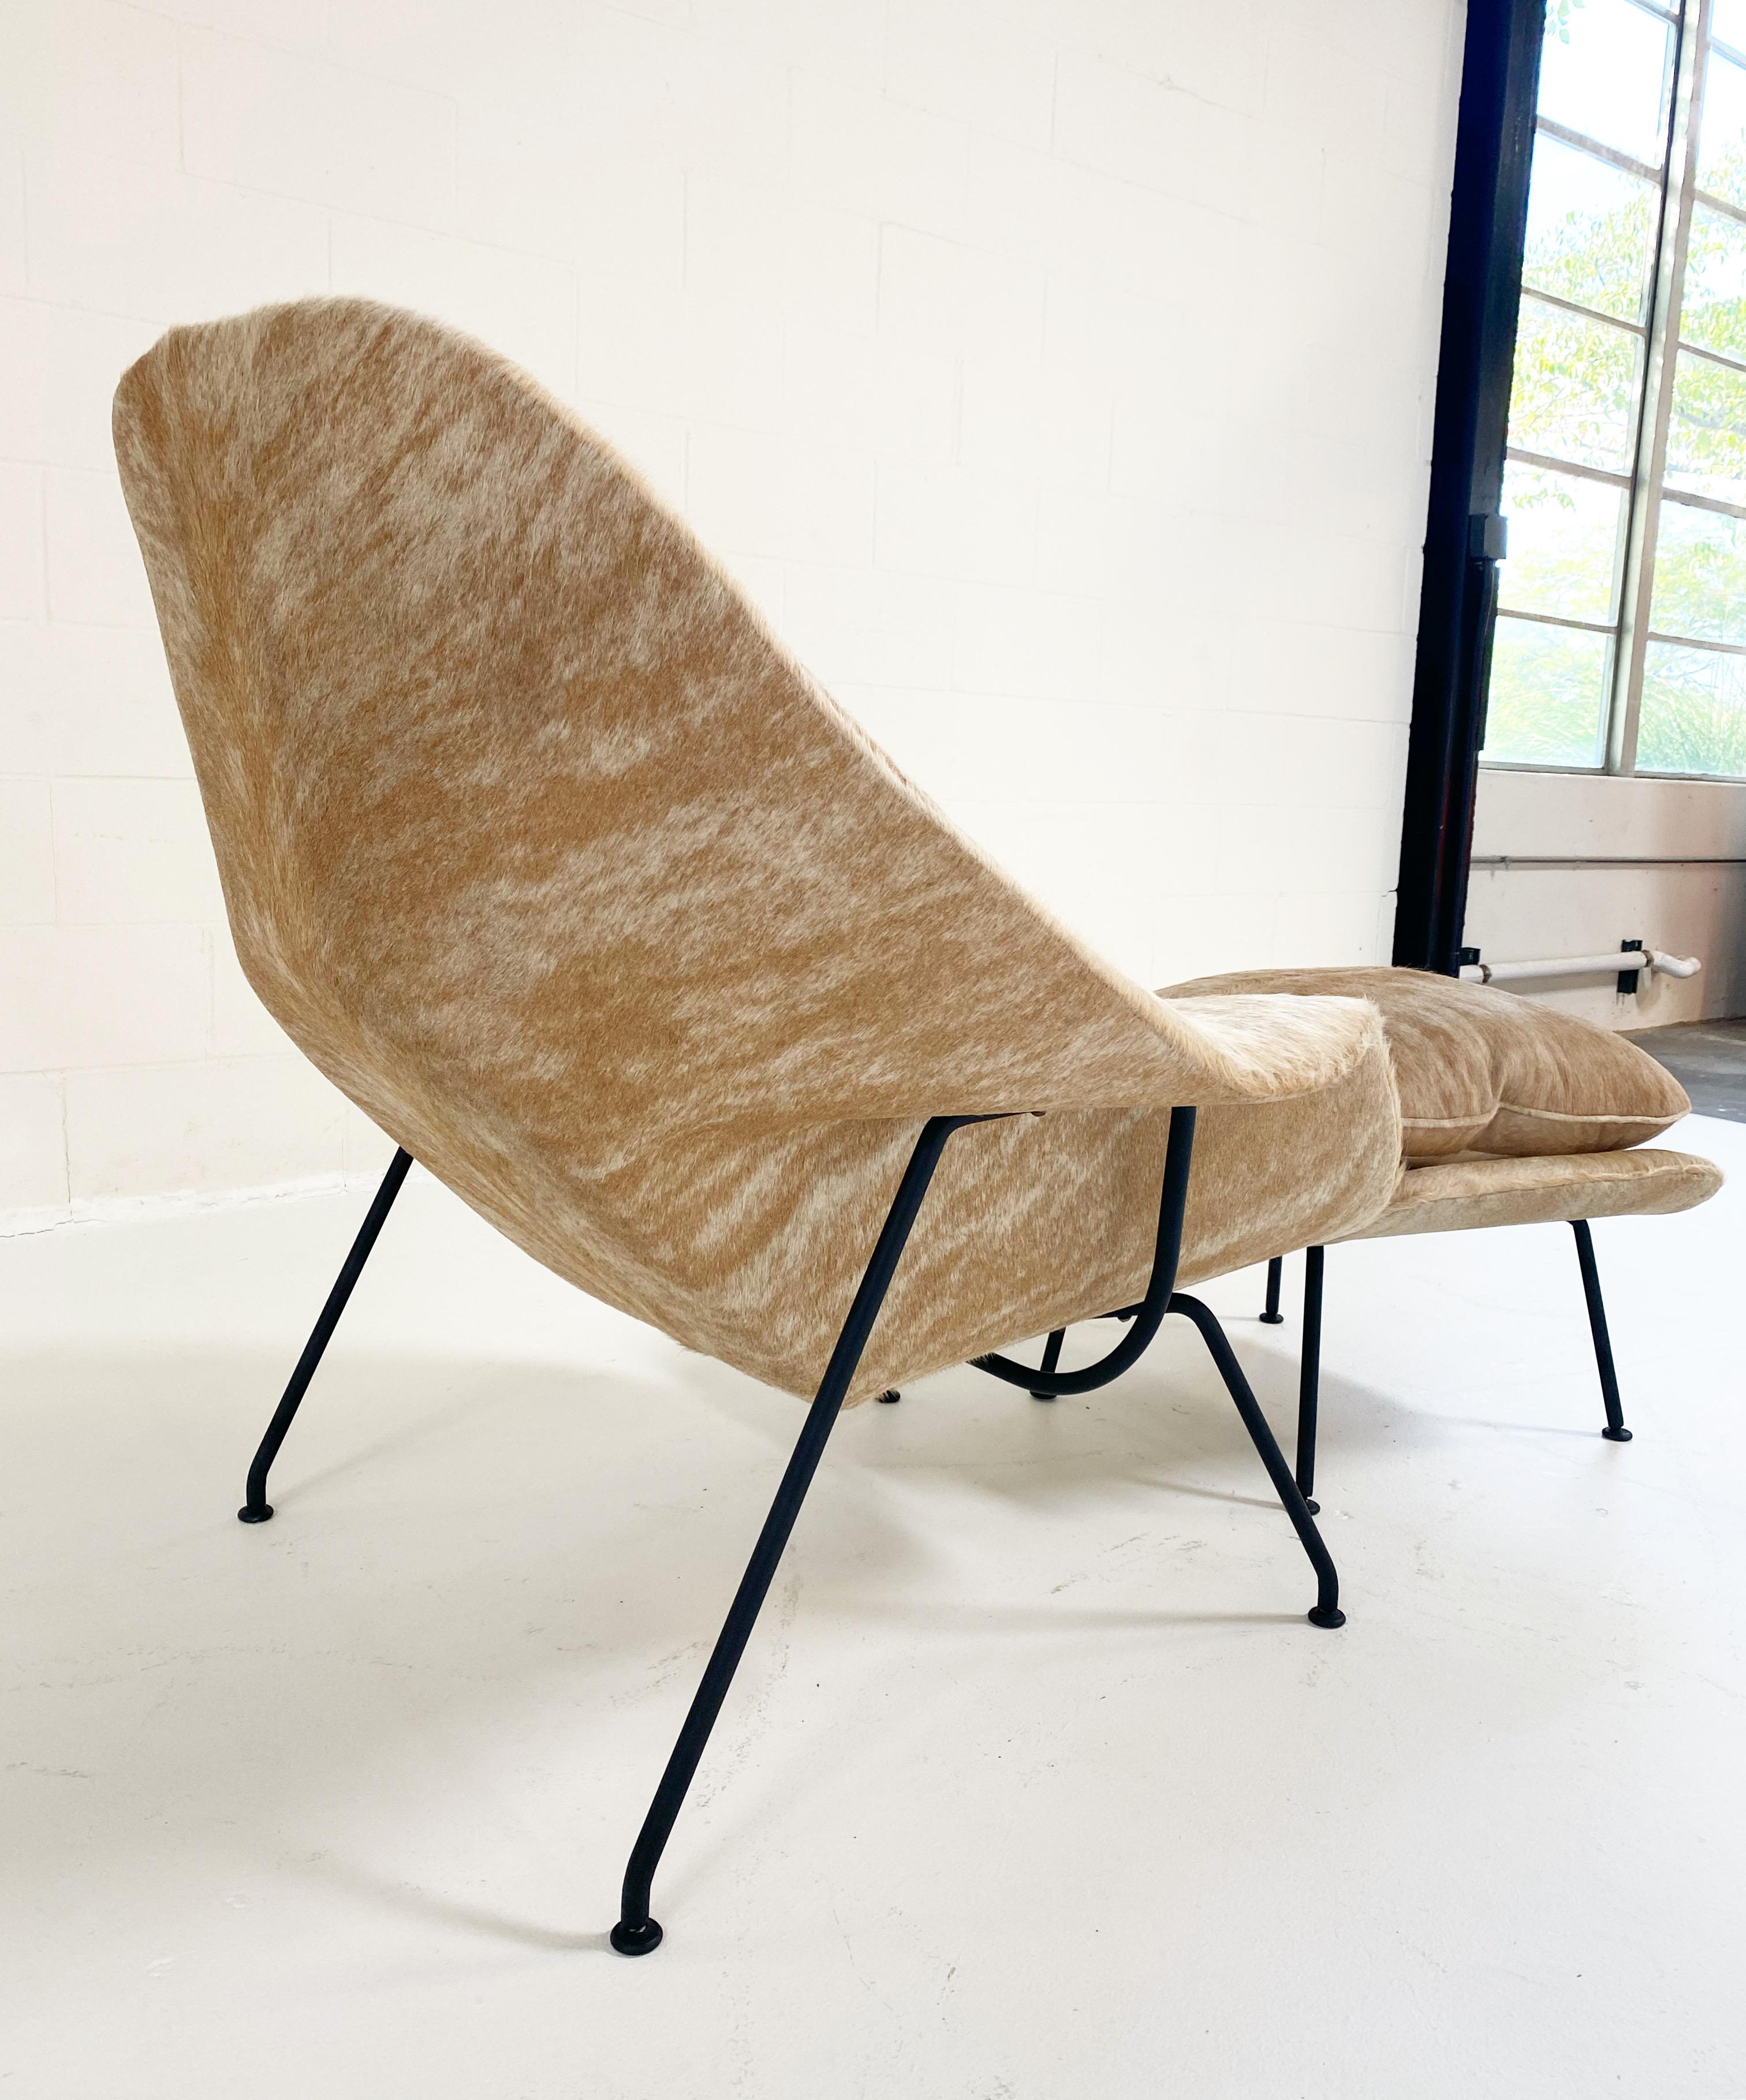 A favorite of the Forsyth design team! We collected this beauty for its icon status.

“Eero Saarinen designed the groundbreaking Womb Chair at Florence Knoll's request for ‘a chair that was like a basket full of pillows - something she could